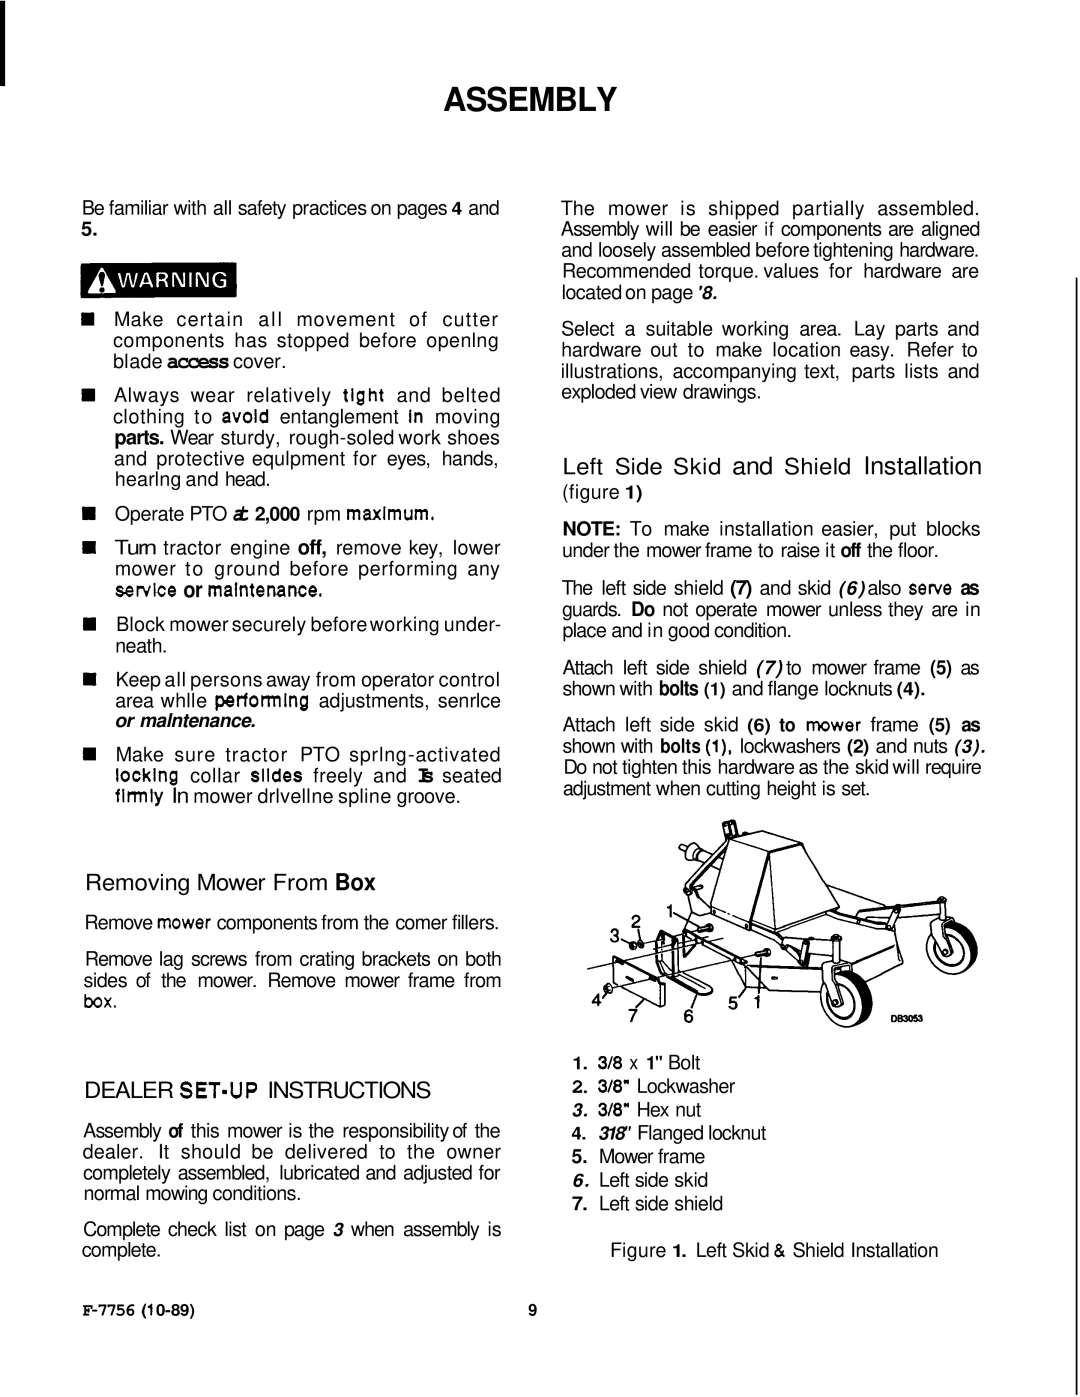 Honda Power Equipment RM752A manual Assembly, Left Side Skid and Shield Installation, Removing Mower From Box 